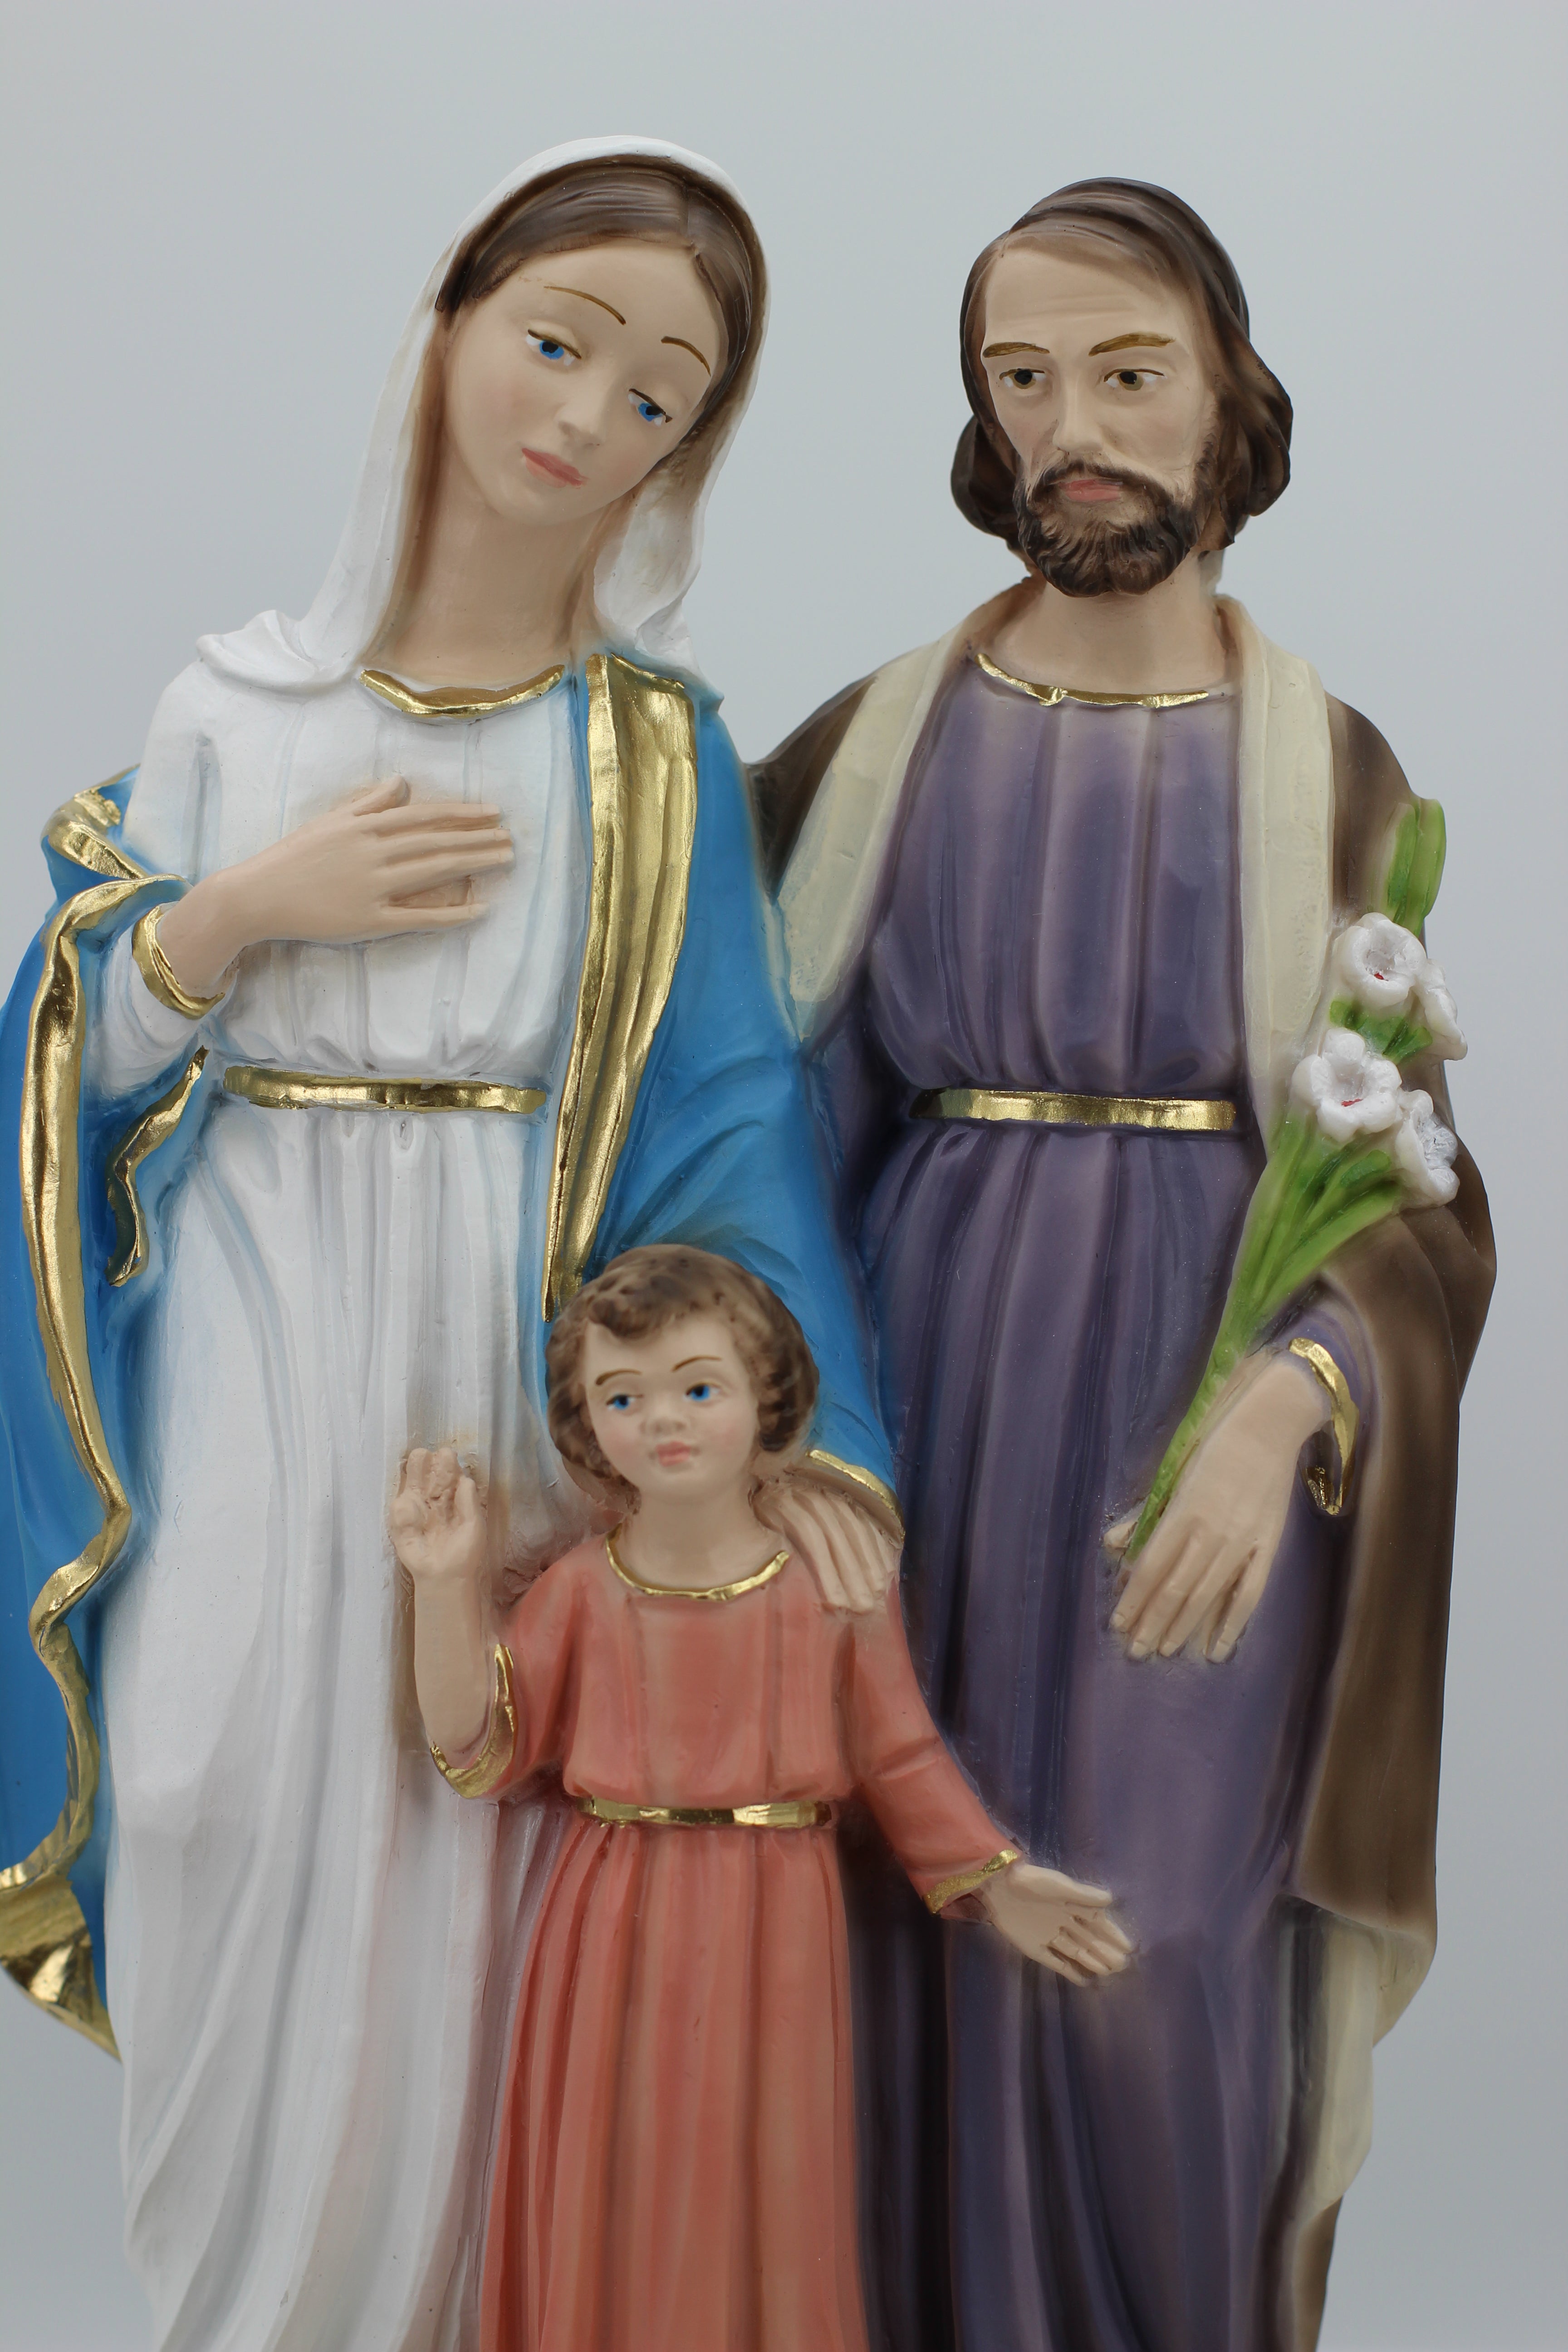 The Faith Gift Shop Sacred Holy Family - Hand Painted in Italy - Our Tuscany Collection - Sagrada Familia